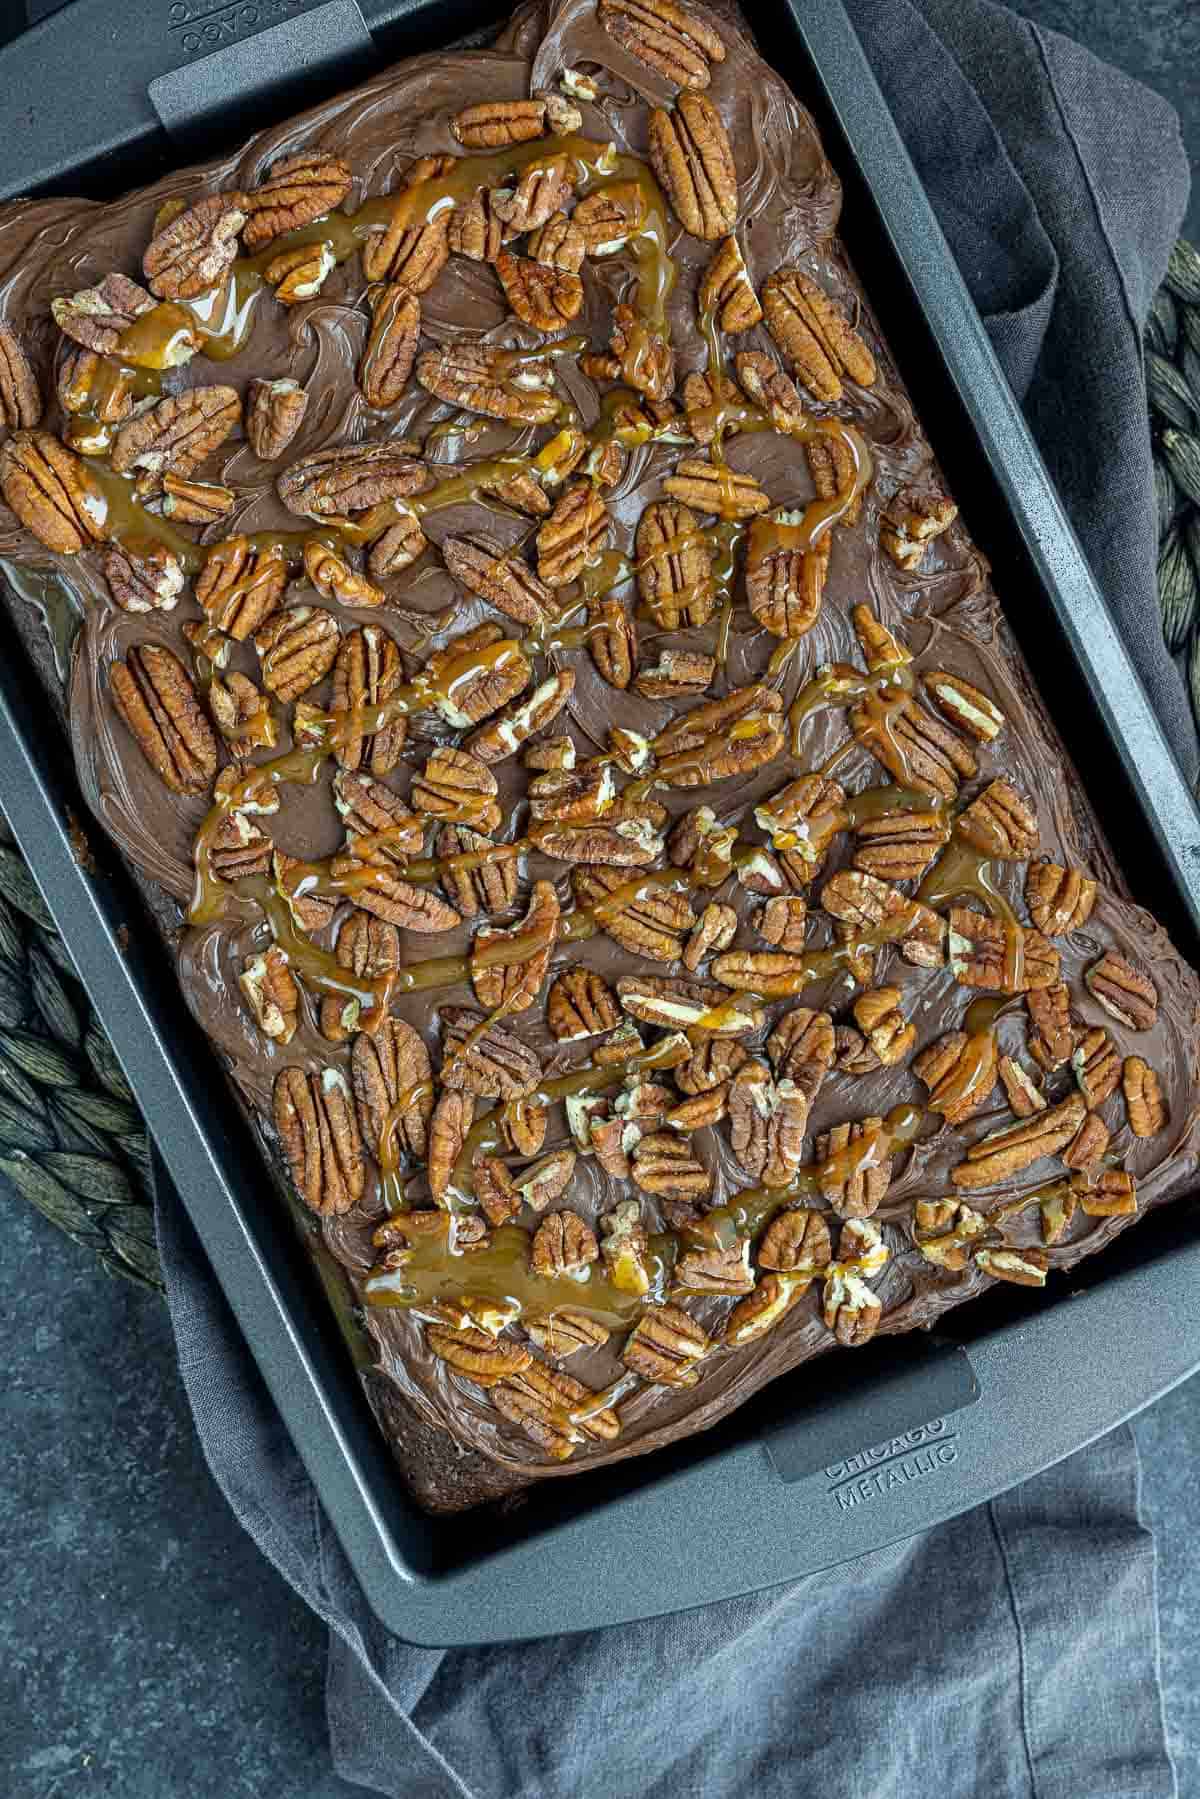 Chocolate Turtle Cake topped with pecans and caramel drizzle